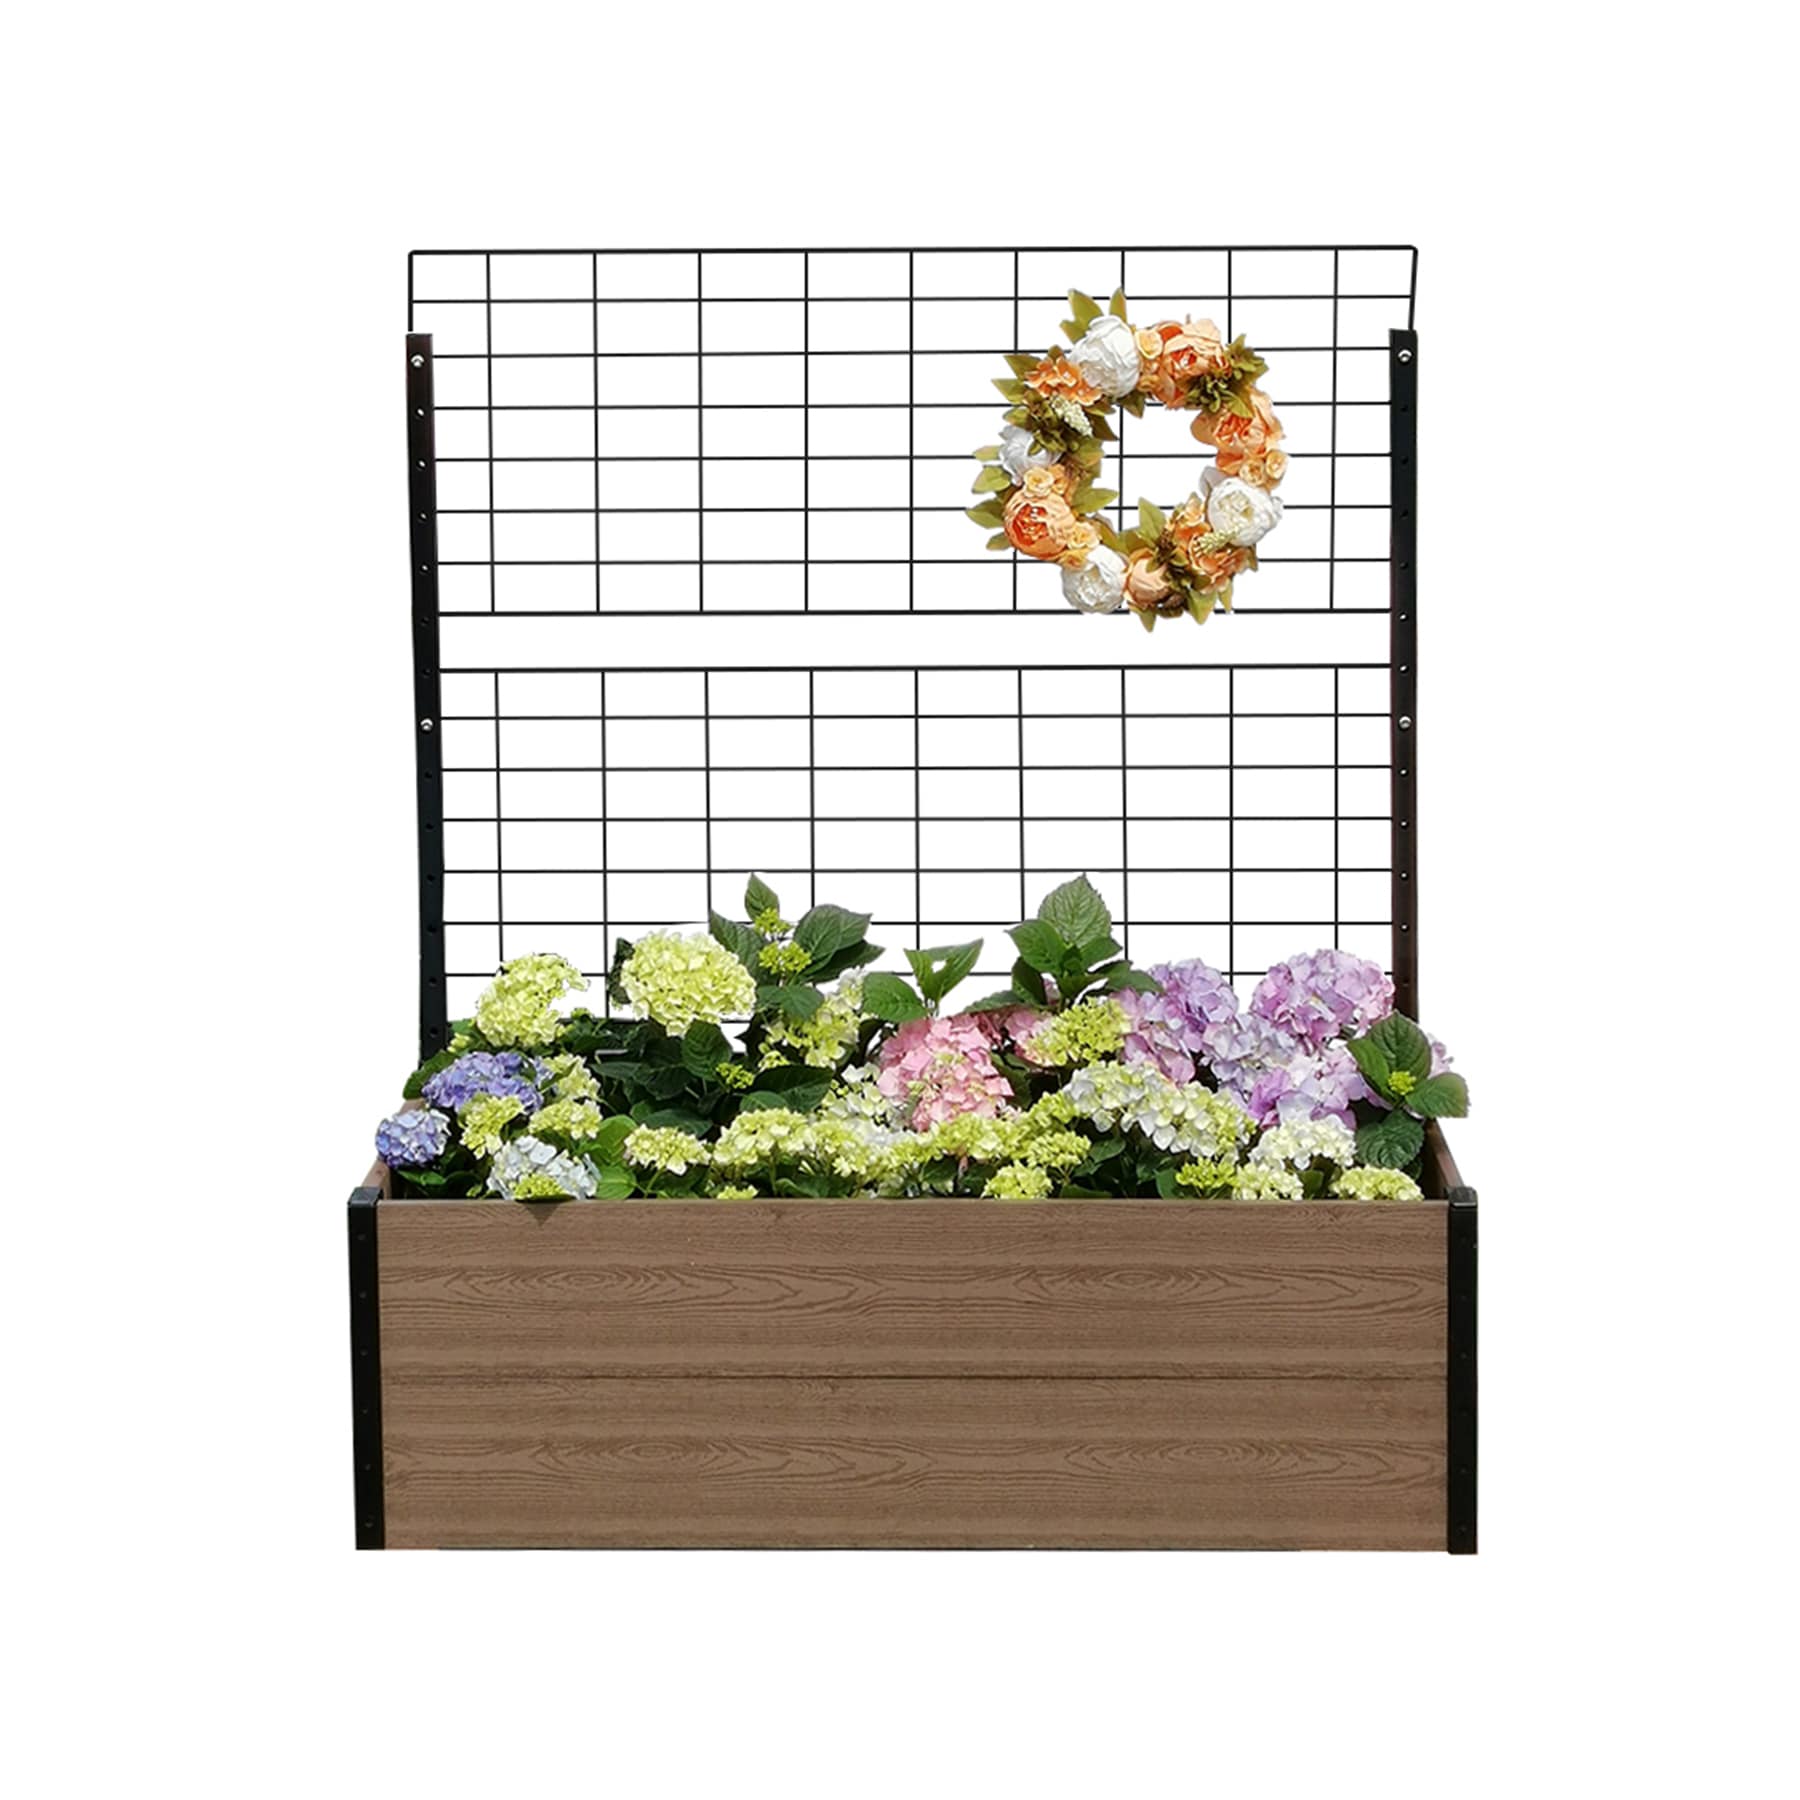 H Raised Garden Raised 24-in Everbloom W Beds Bed department 47-in 45-in the x Garden x Brown L in at